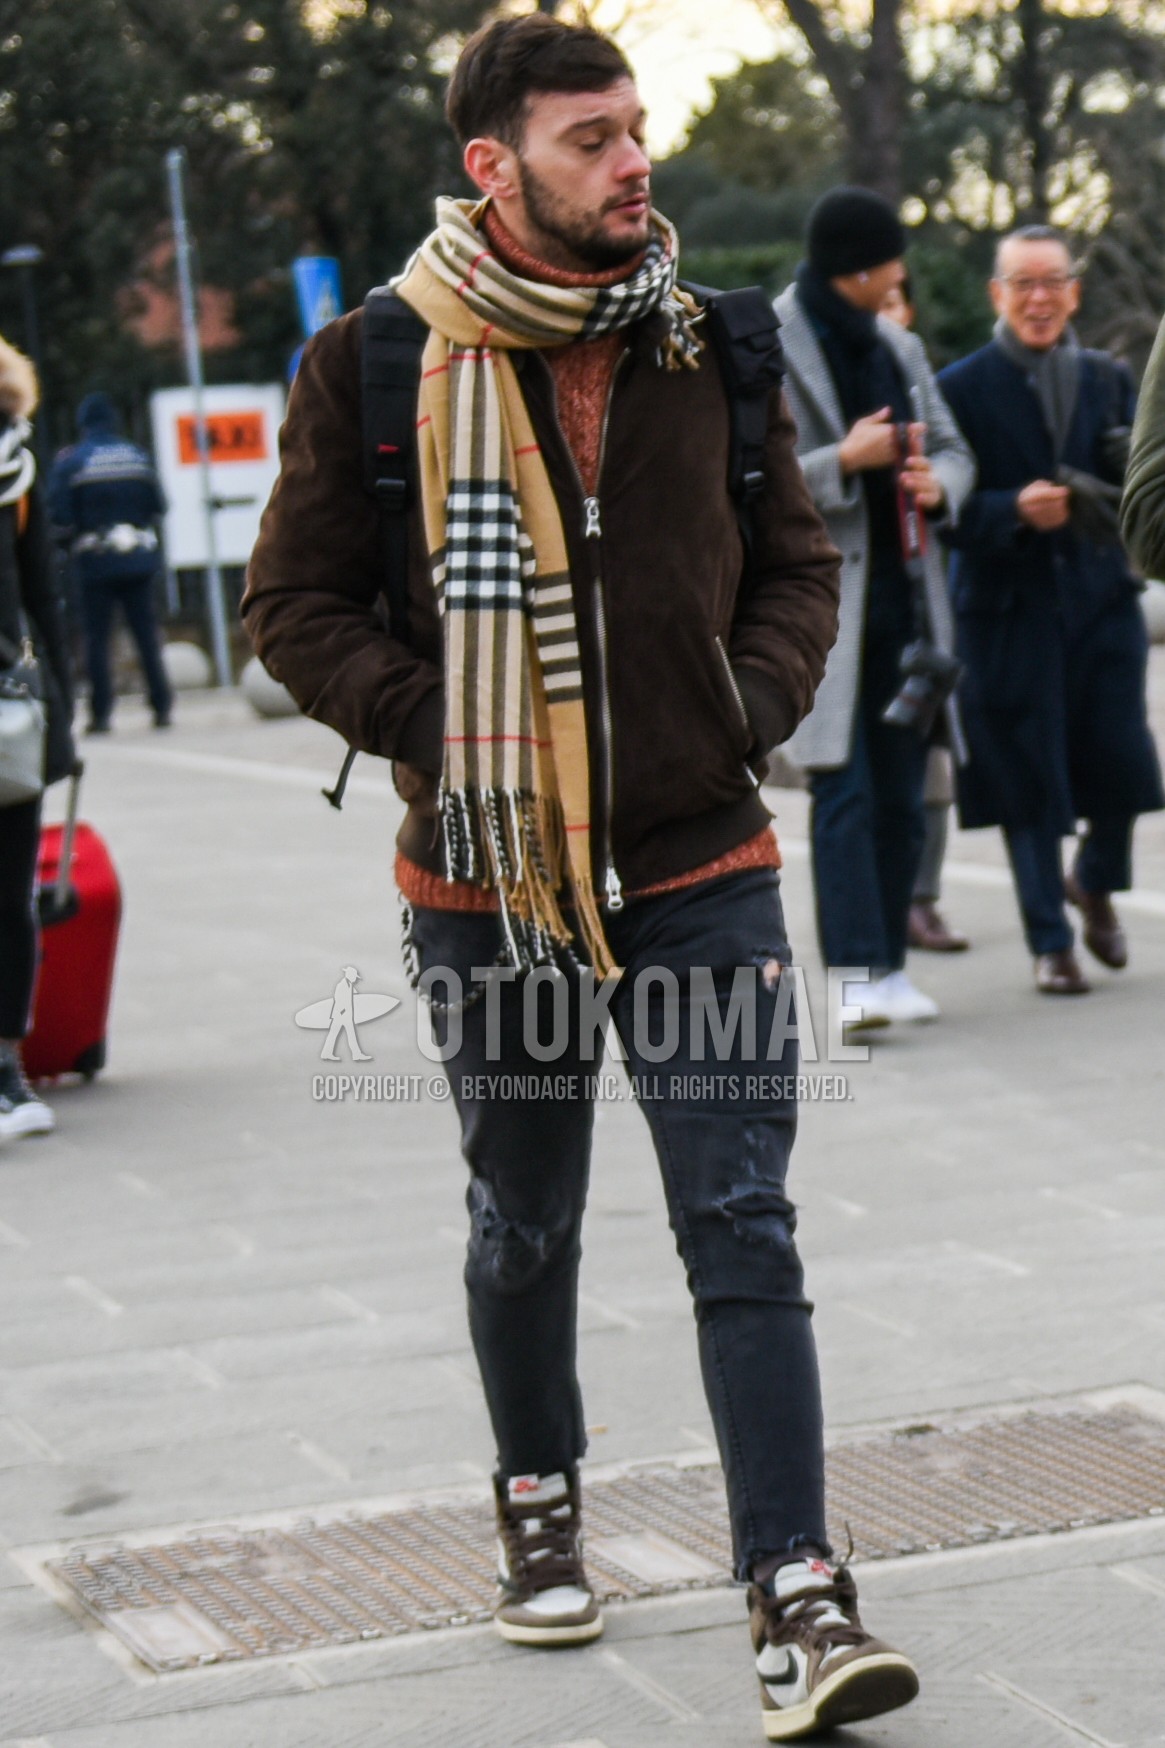 Men's autumn winter outfit with beige check scarf, brown plain leather jacket, brown tops/innerwear turtleneck knit, gray plain damaged jeans, brown high-cut sneakers, black plain backpack.